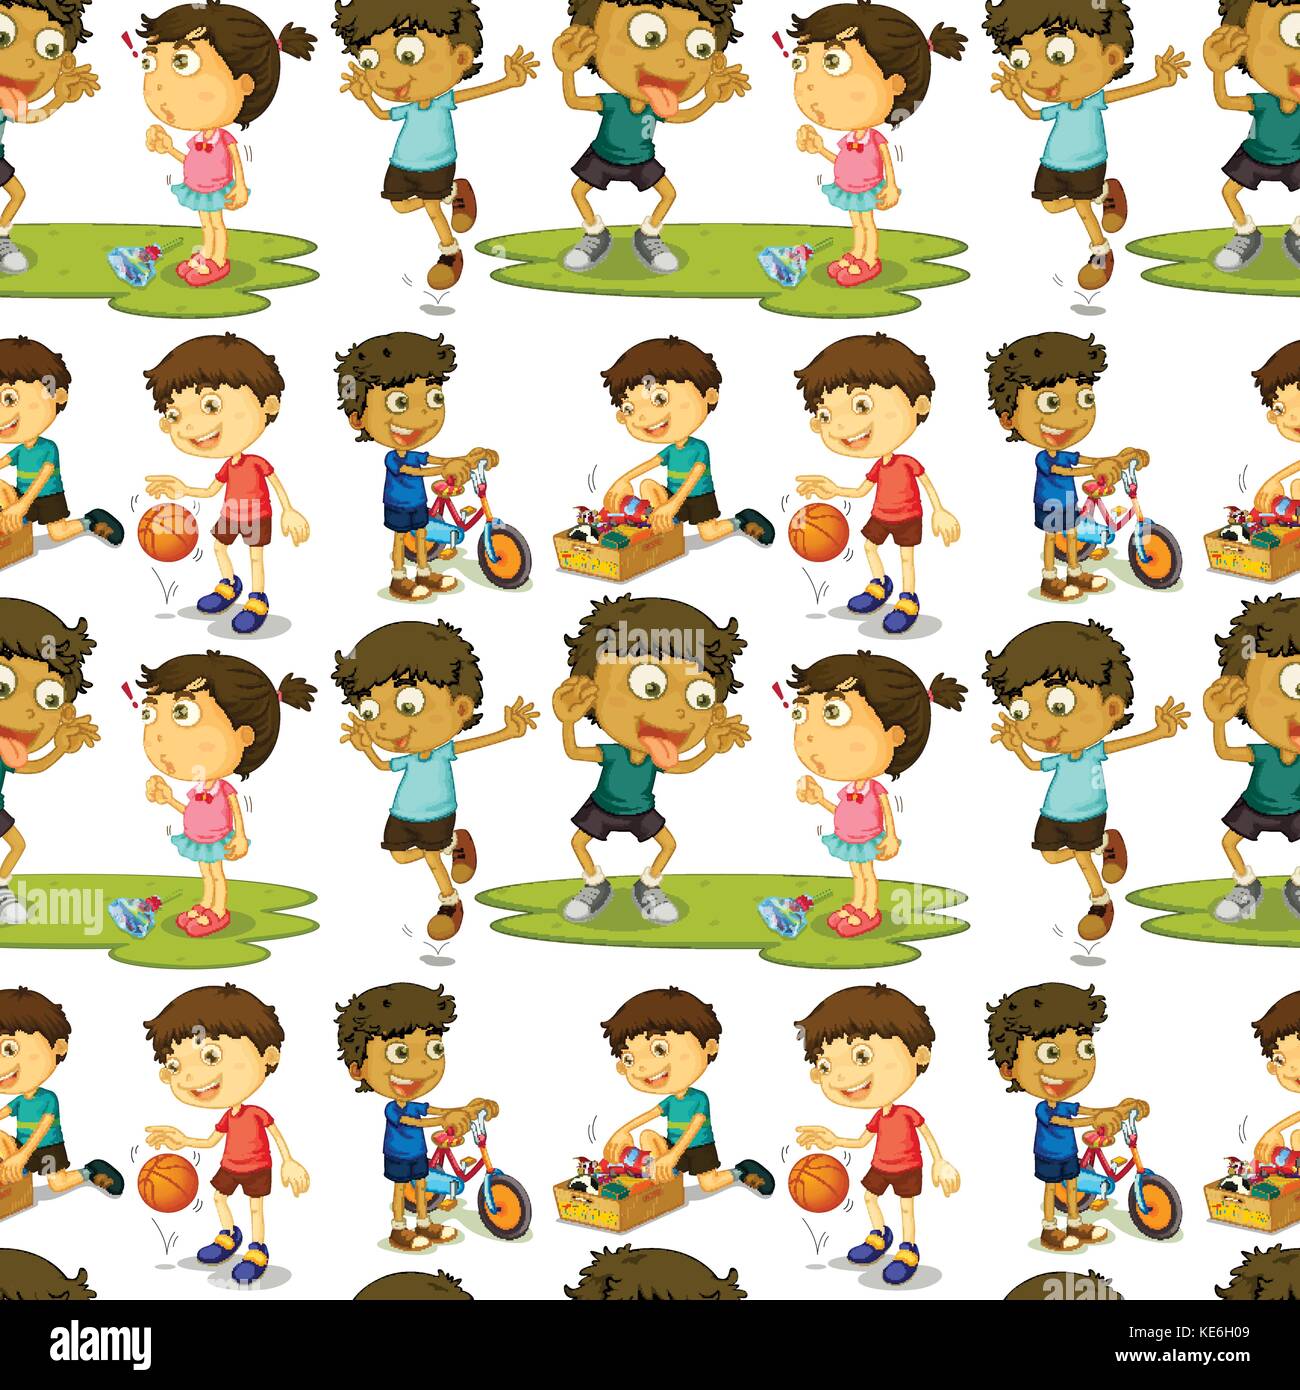 Seamless boys and girls playing illustration Stock Vector